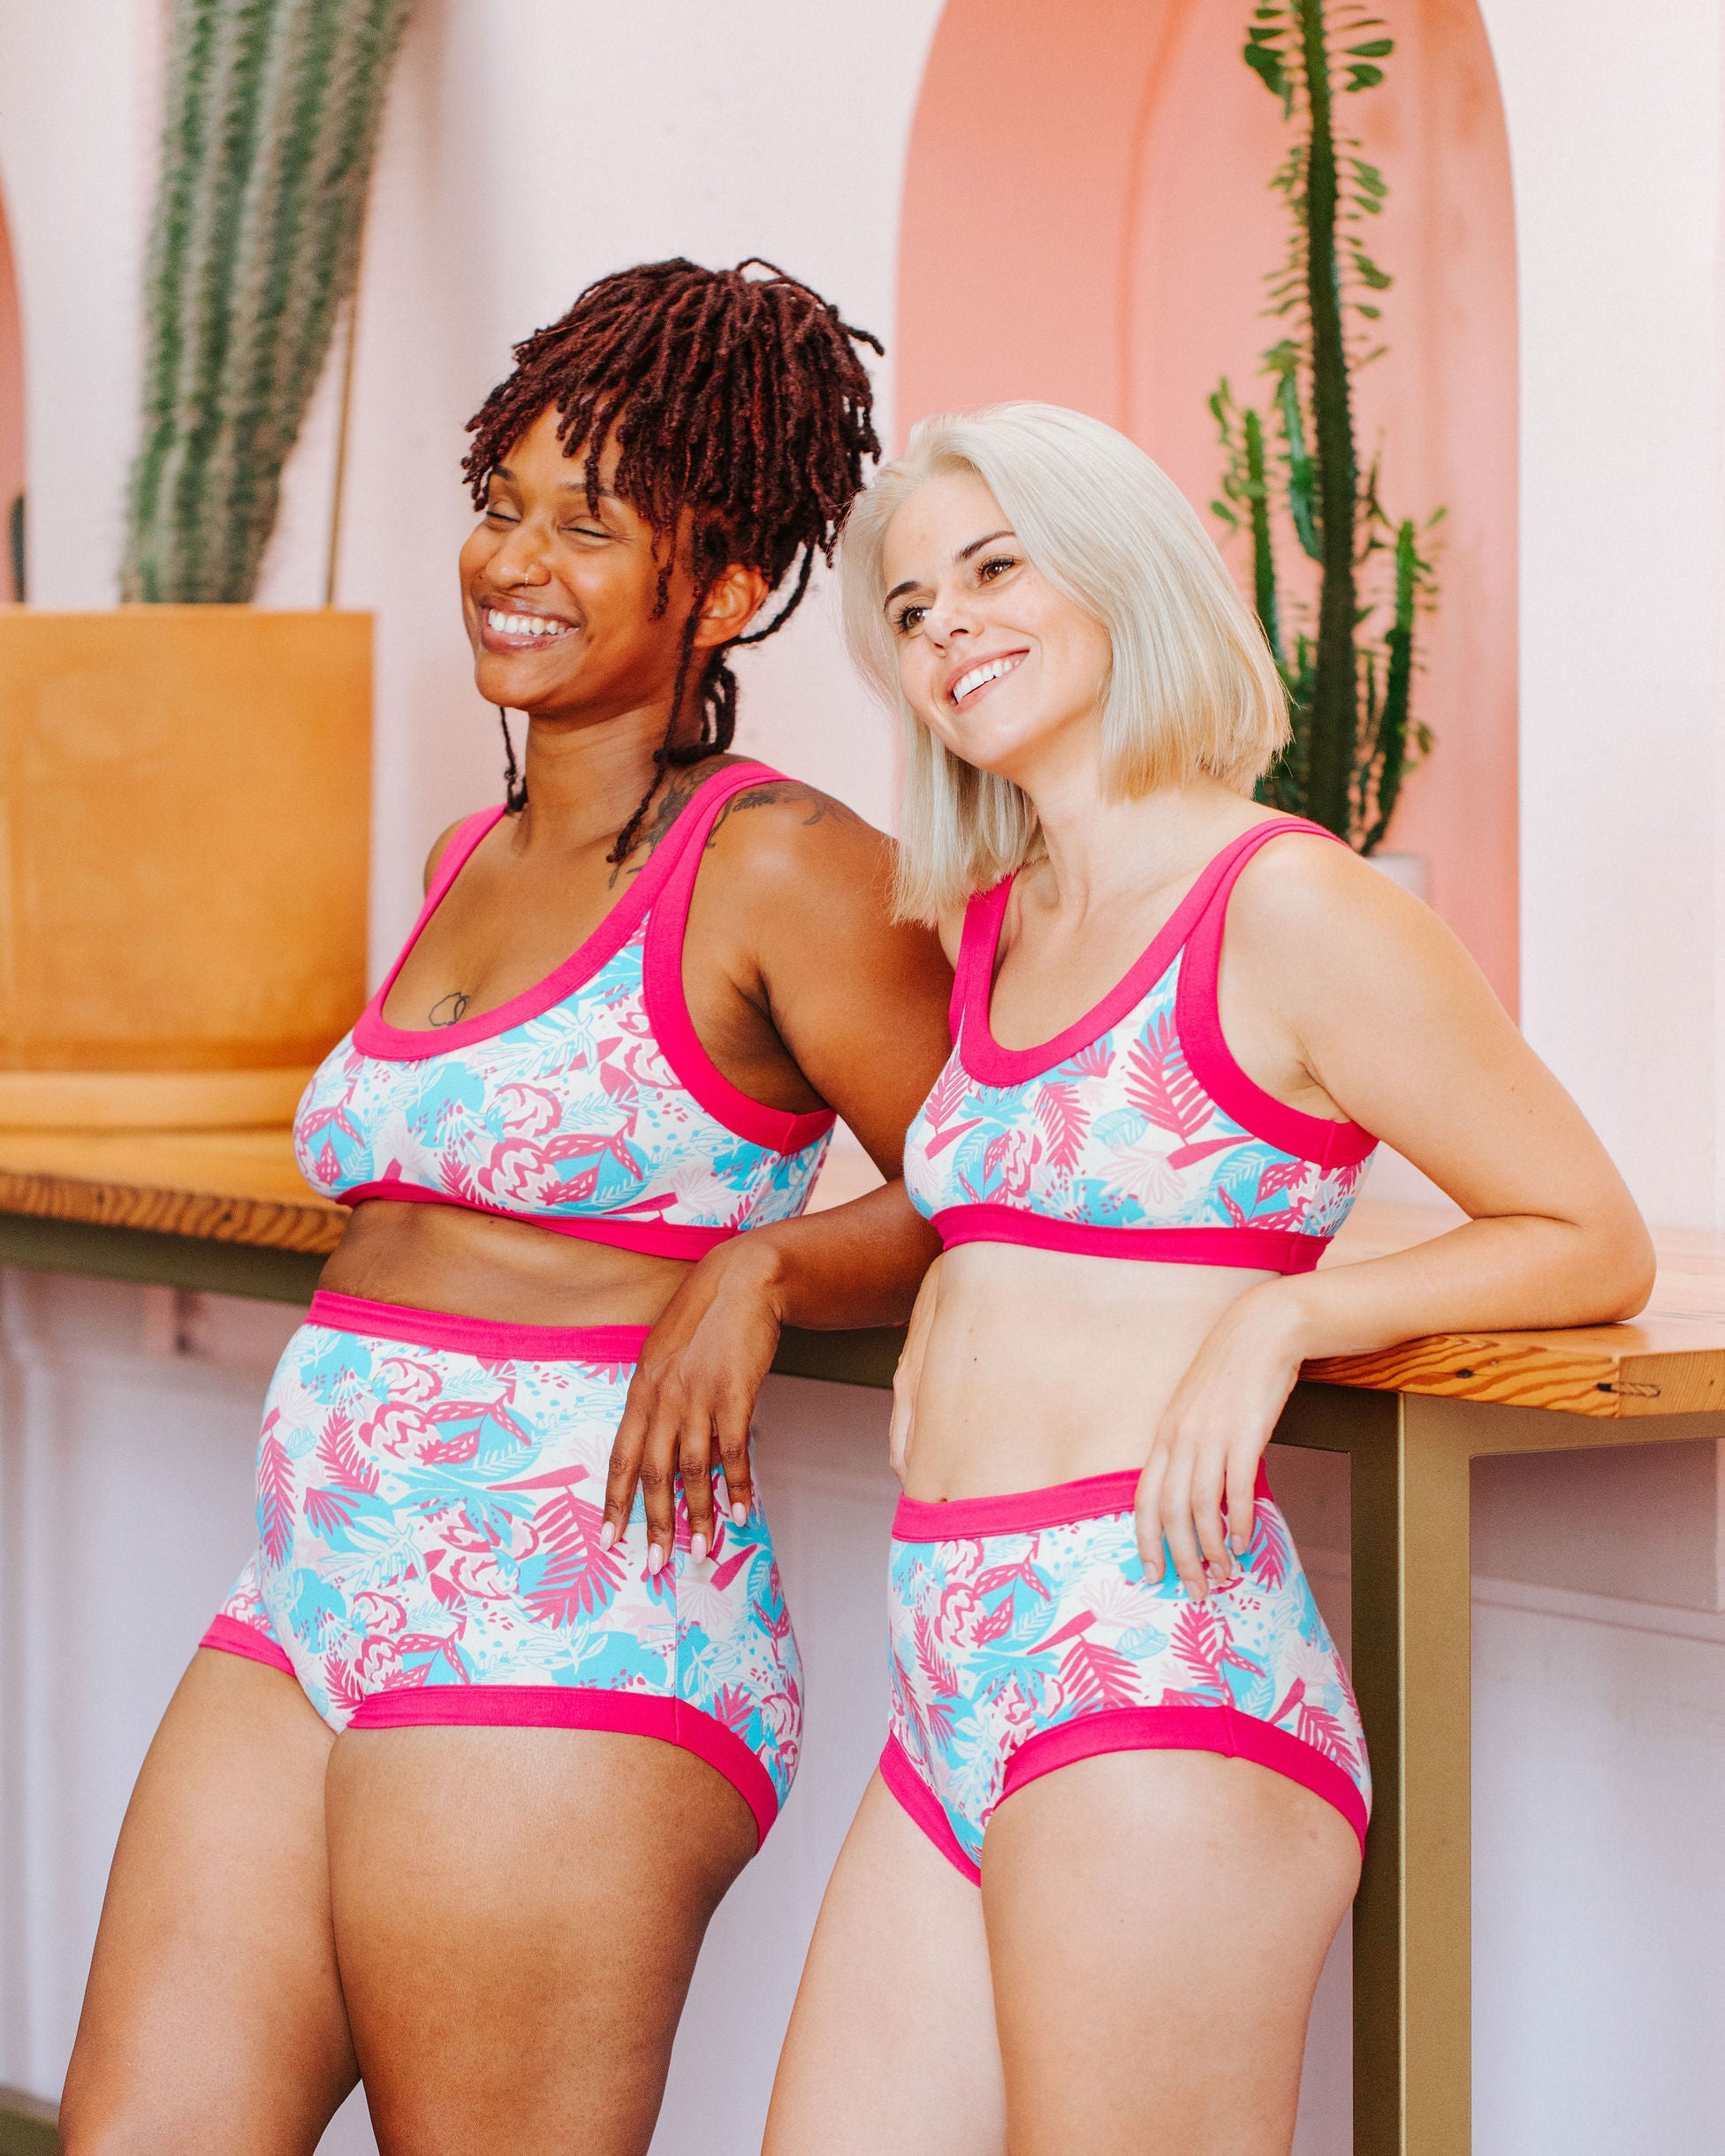 Two models laughing while wearing sets in Thunderpants Bralettes and underwear in Finding Flamingos - pink and blue Miami-inspired print.